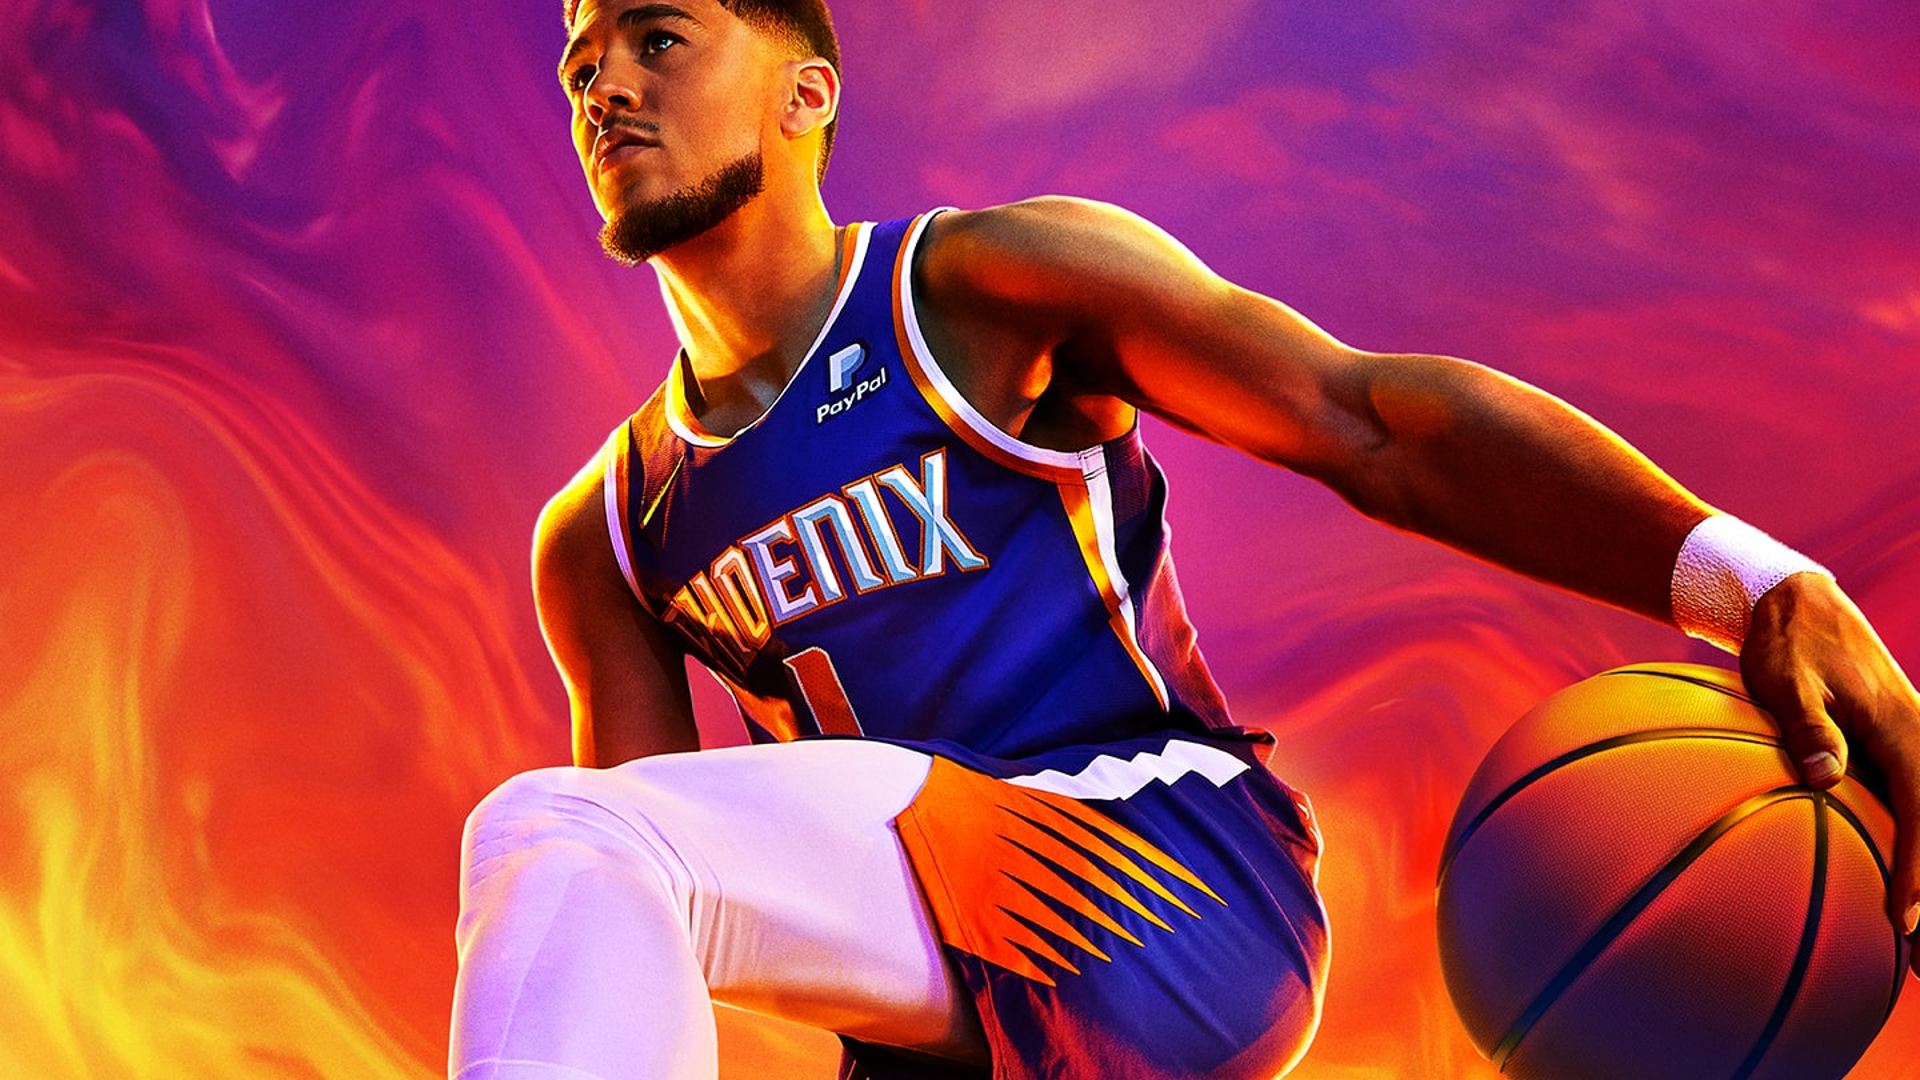 Best Sports Games: Devin Booker can be seen